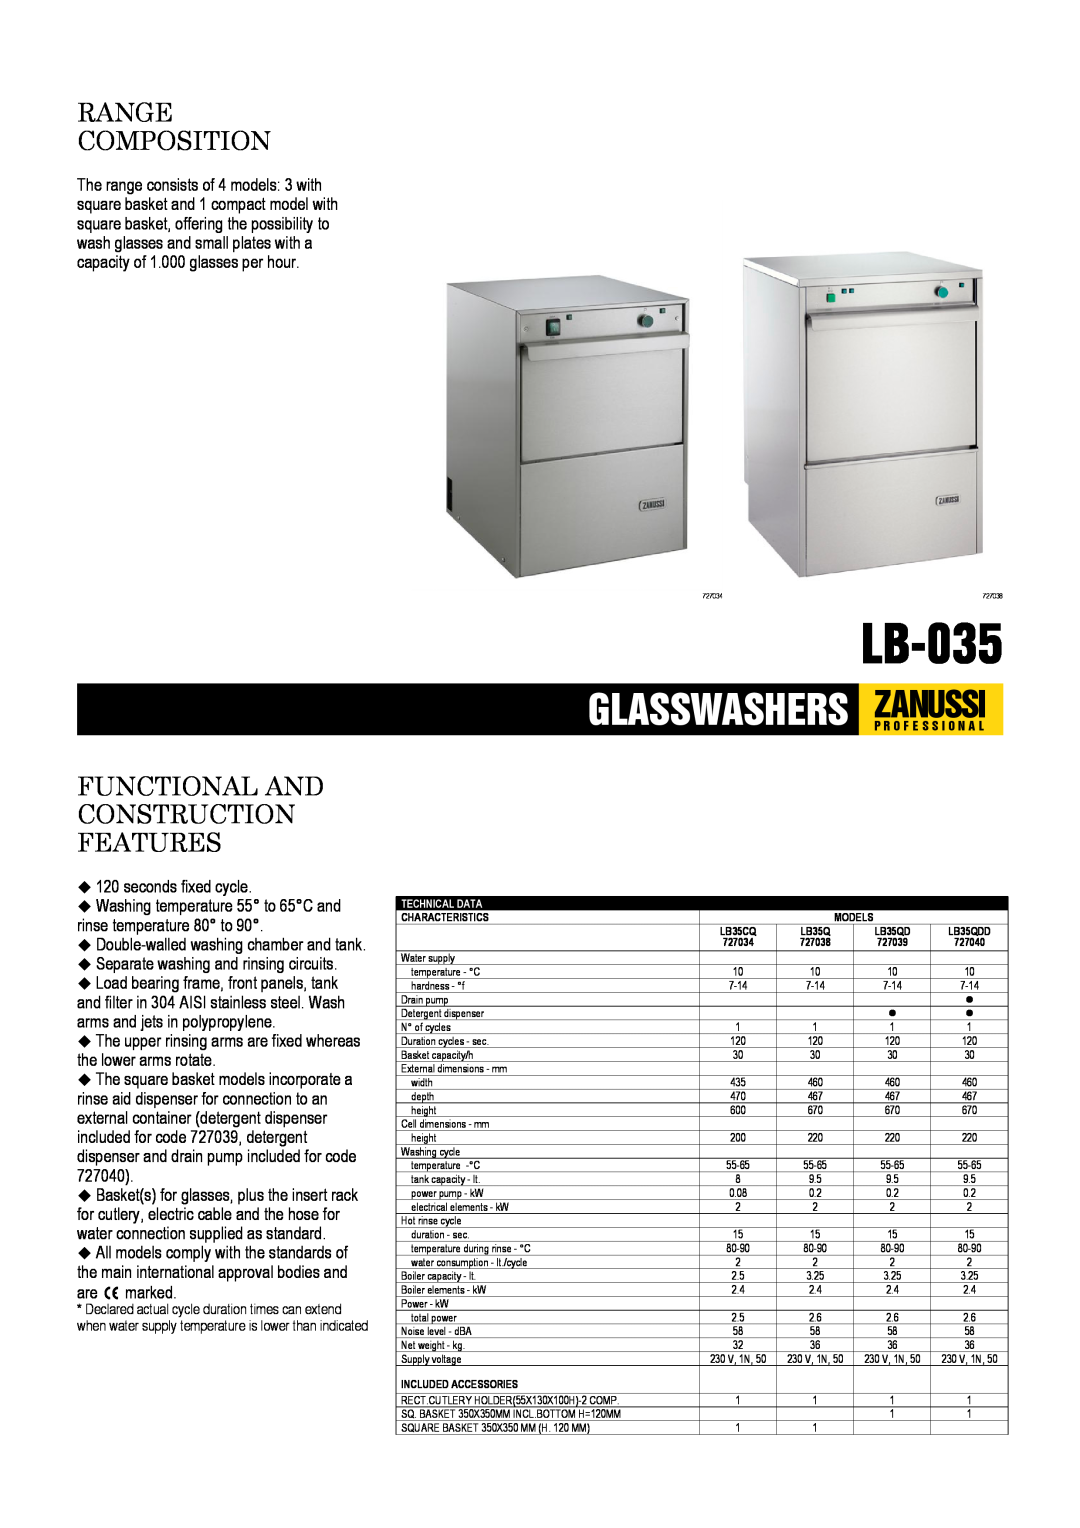 Zanussi LB35QD dimensions Range Composition, Functional And Construction Features, seconds fixed cycle, are H marked 